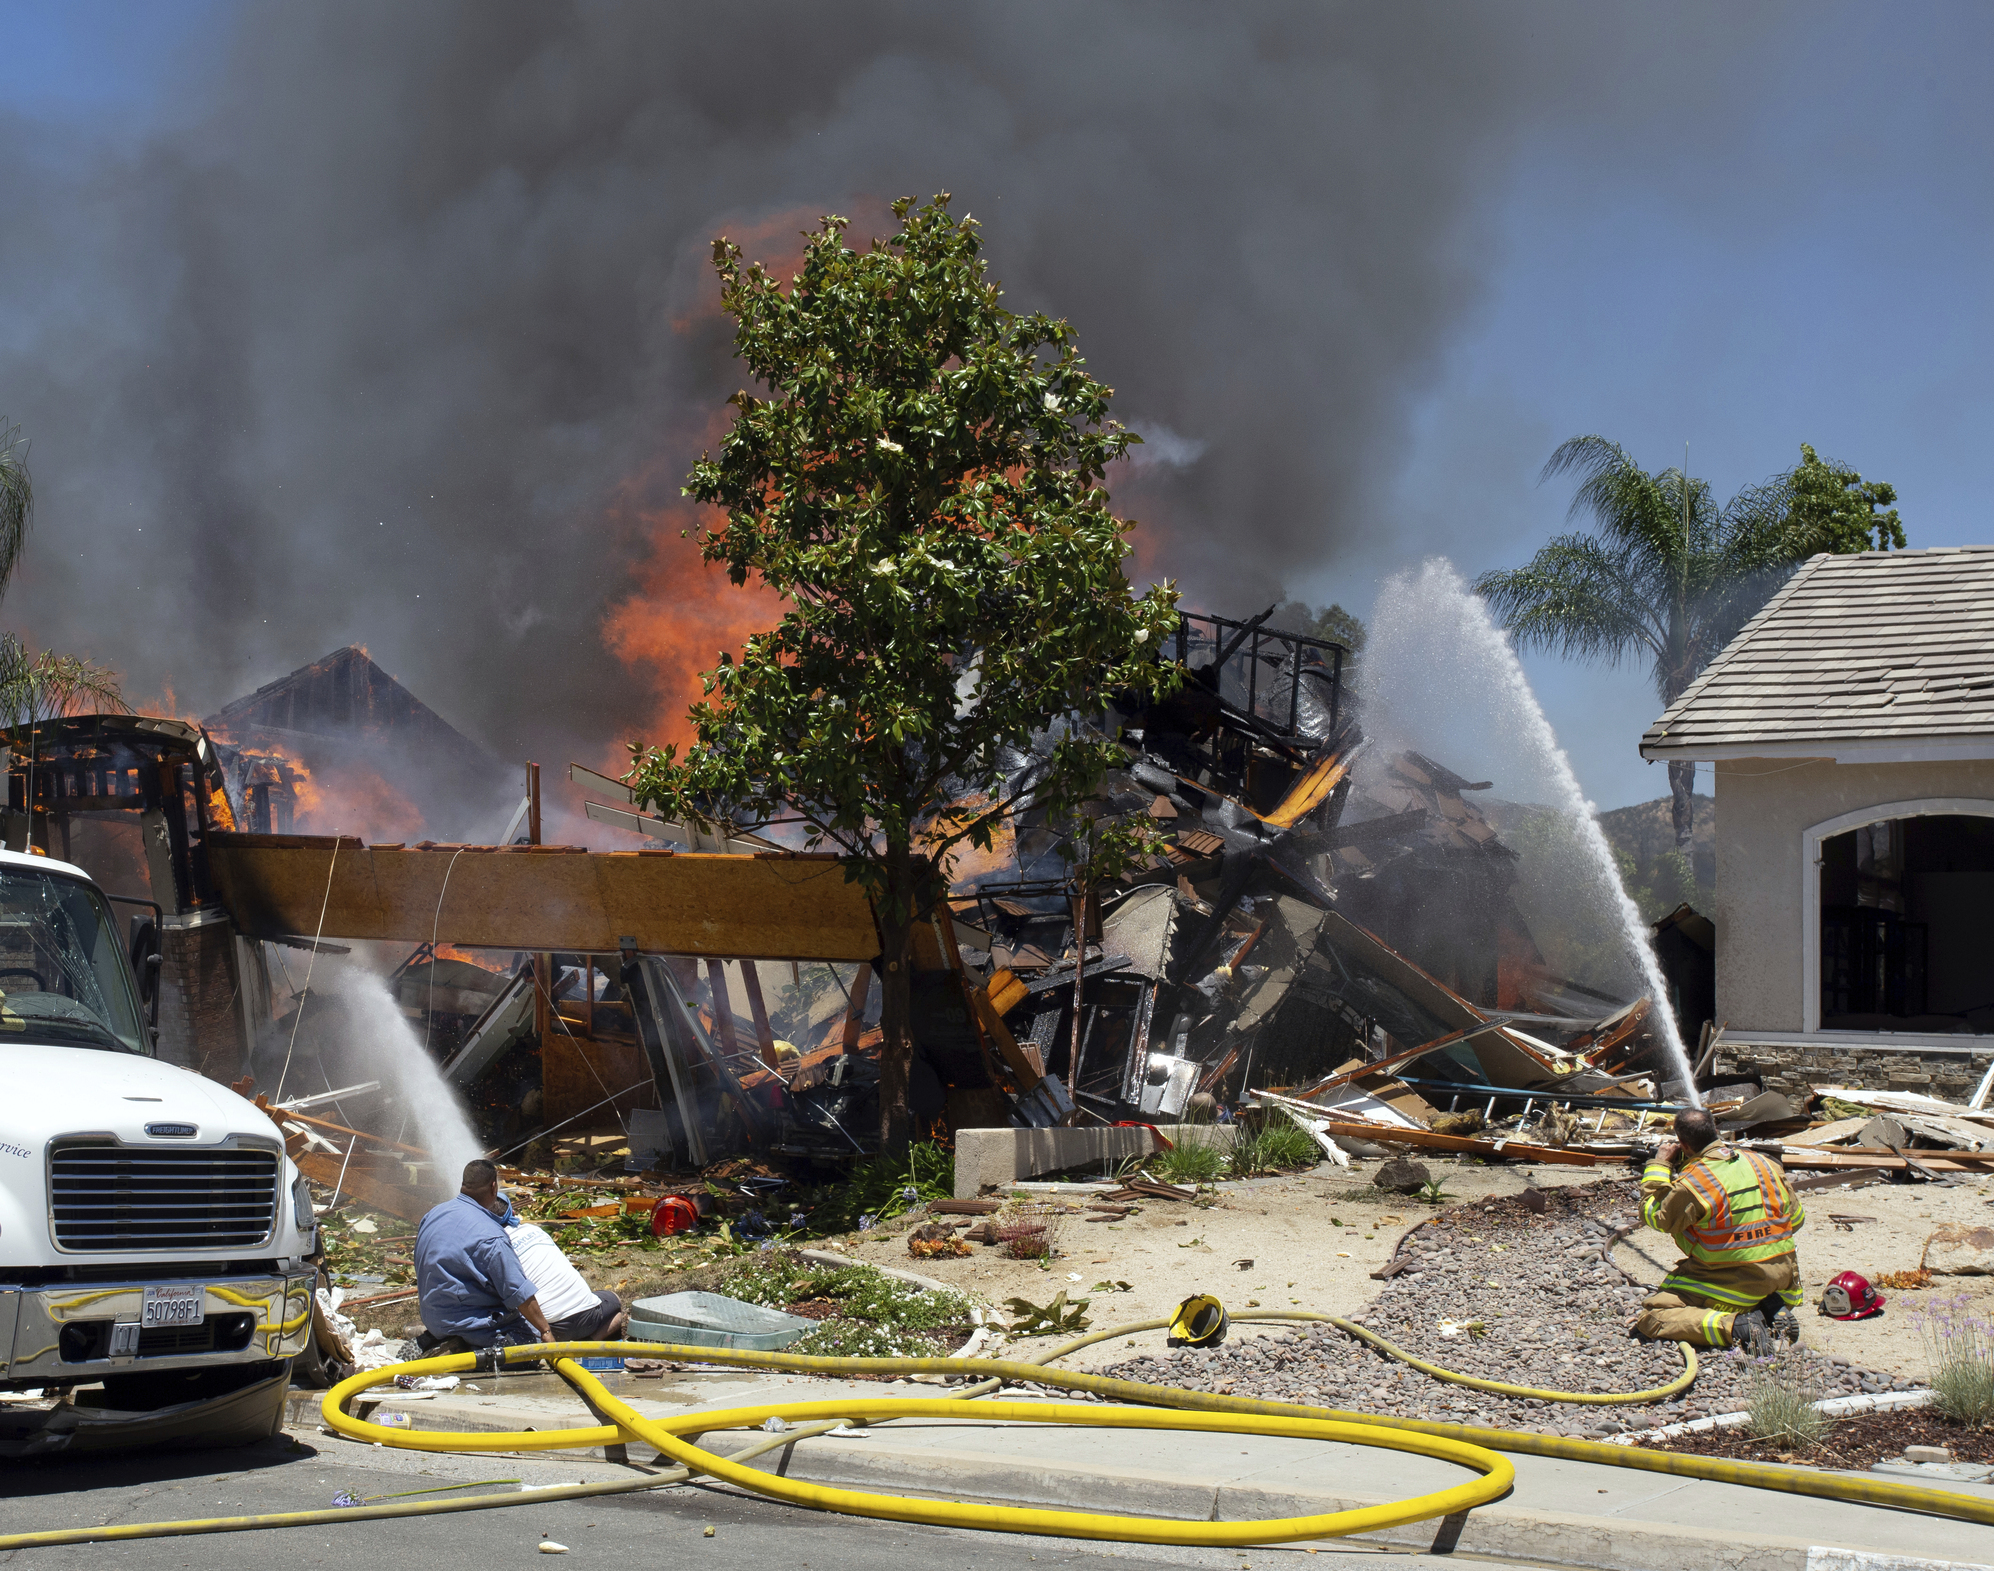 PHOTO: A firefighter and civilians train fire hoses on a burning home after an explosion and fire destroyed the home in Murrieta, Calif., sending up thick flames and closing several streets.